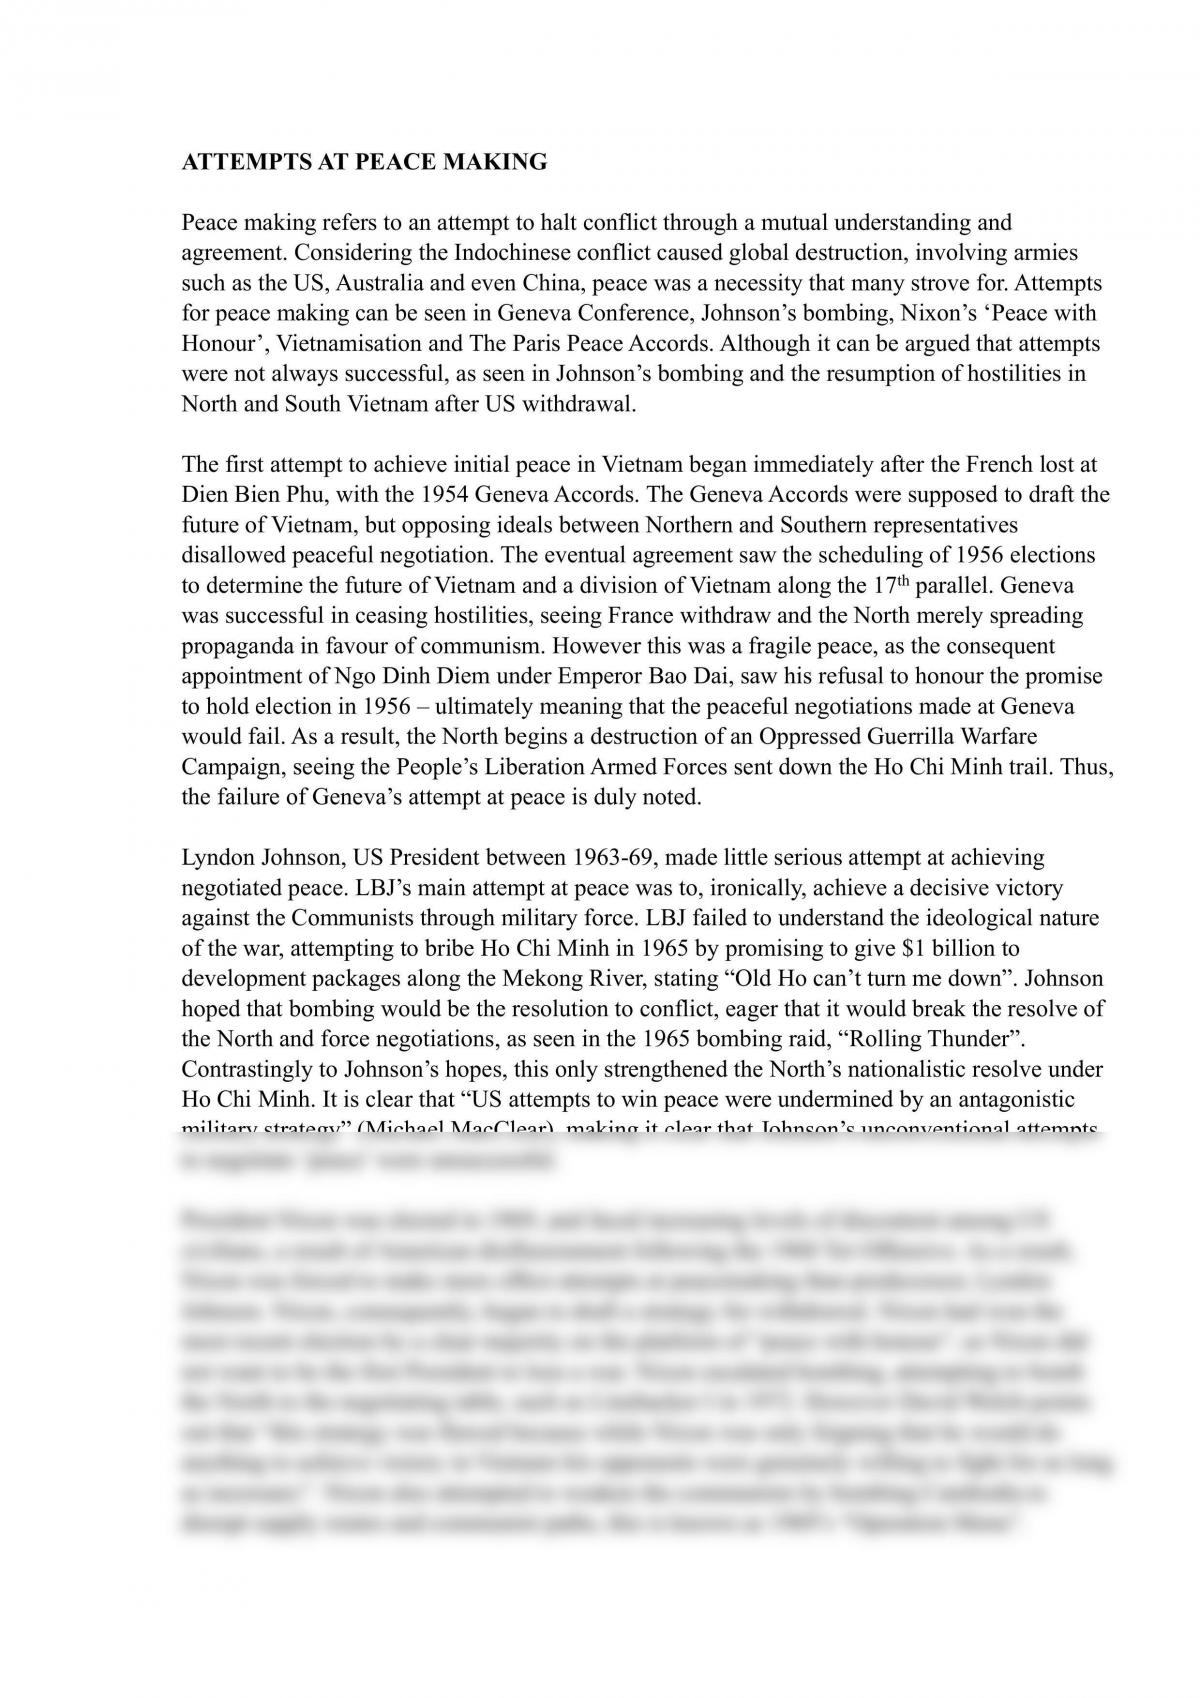 Essay regarding attempts at peace making in the Indochina Wars - Page 1